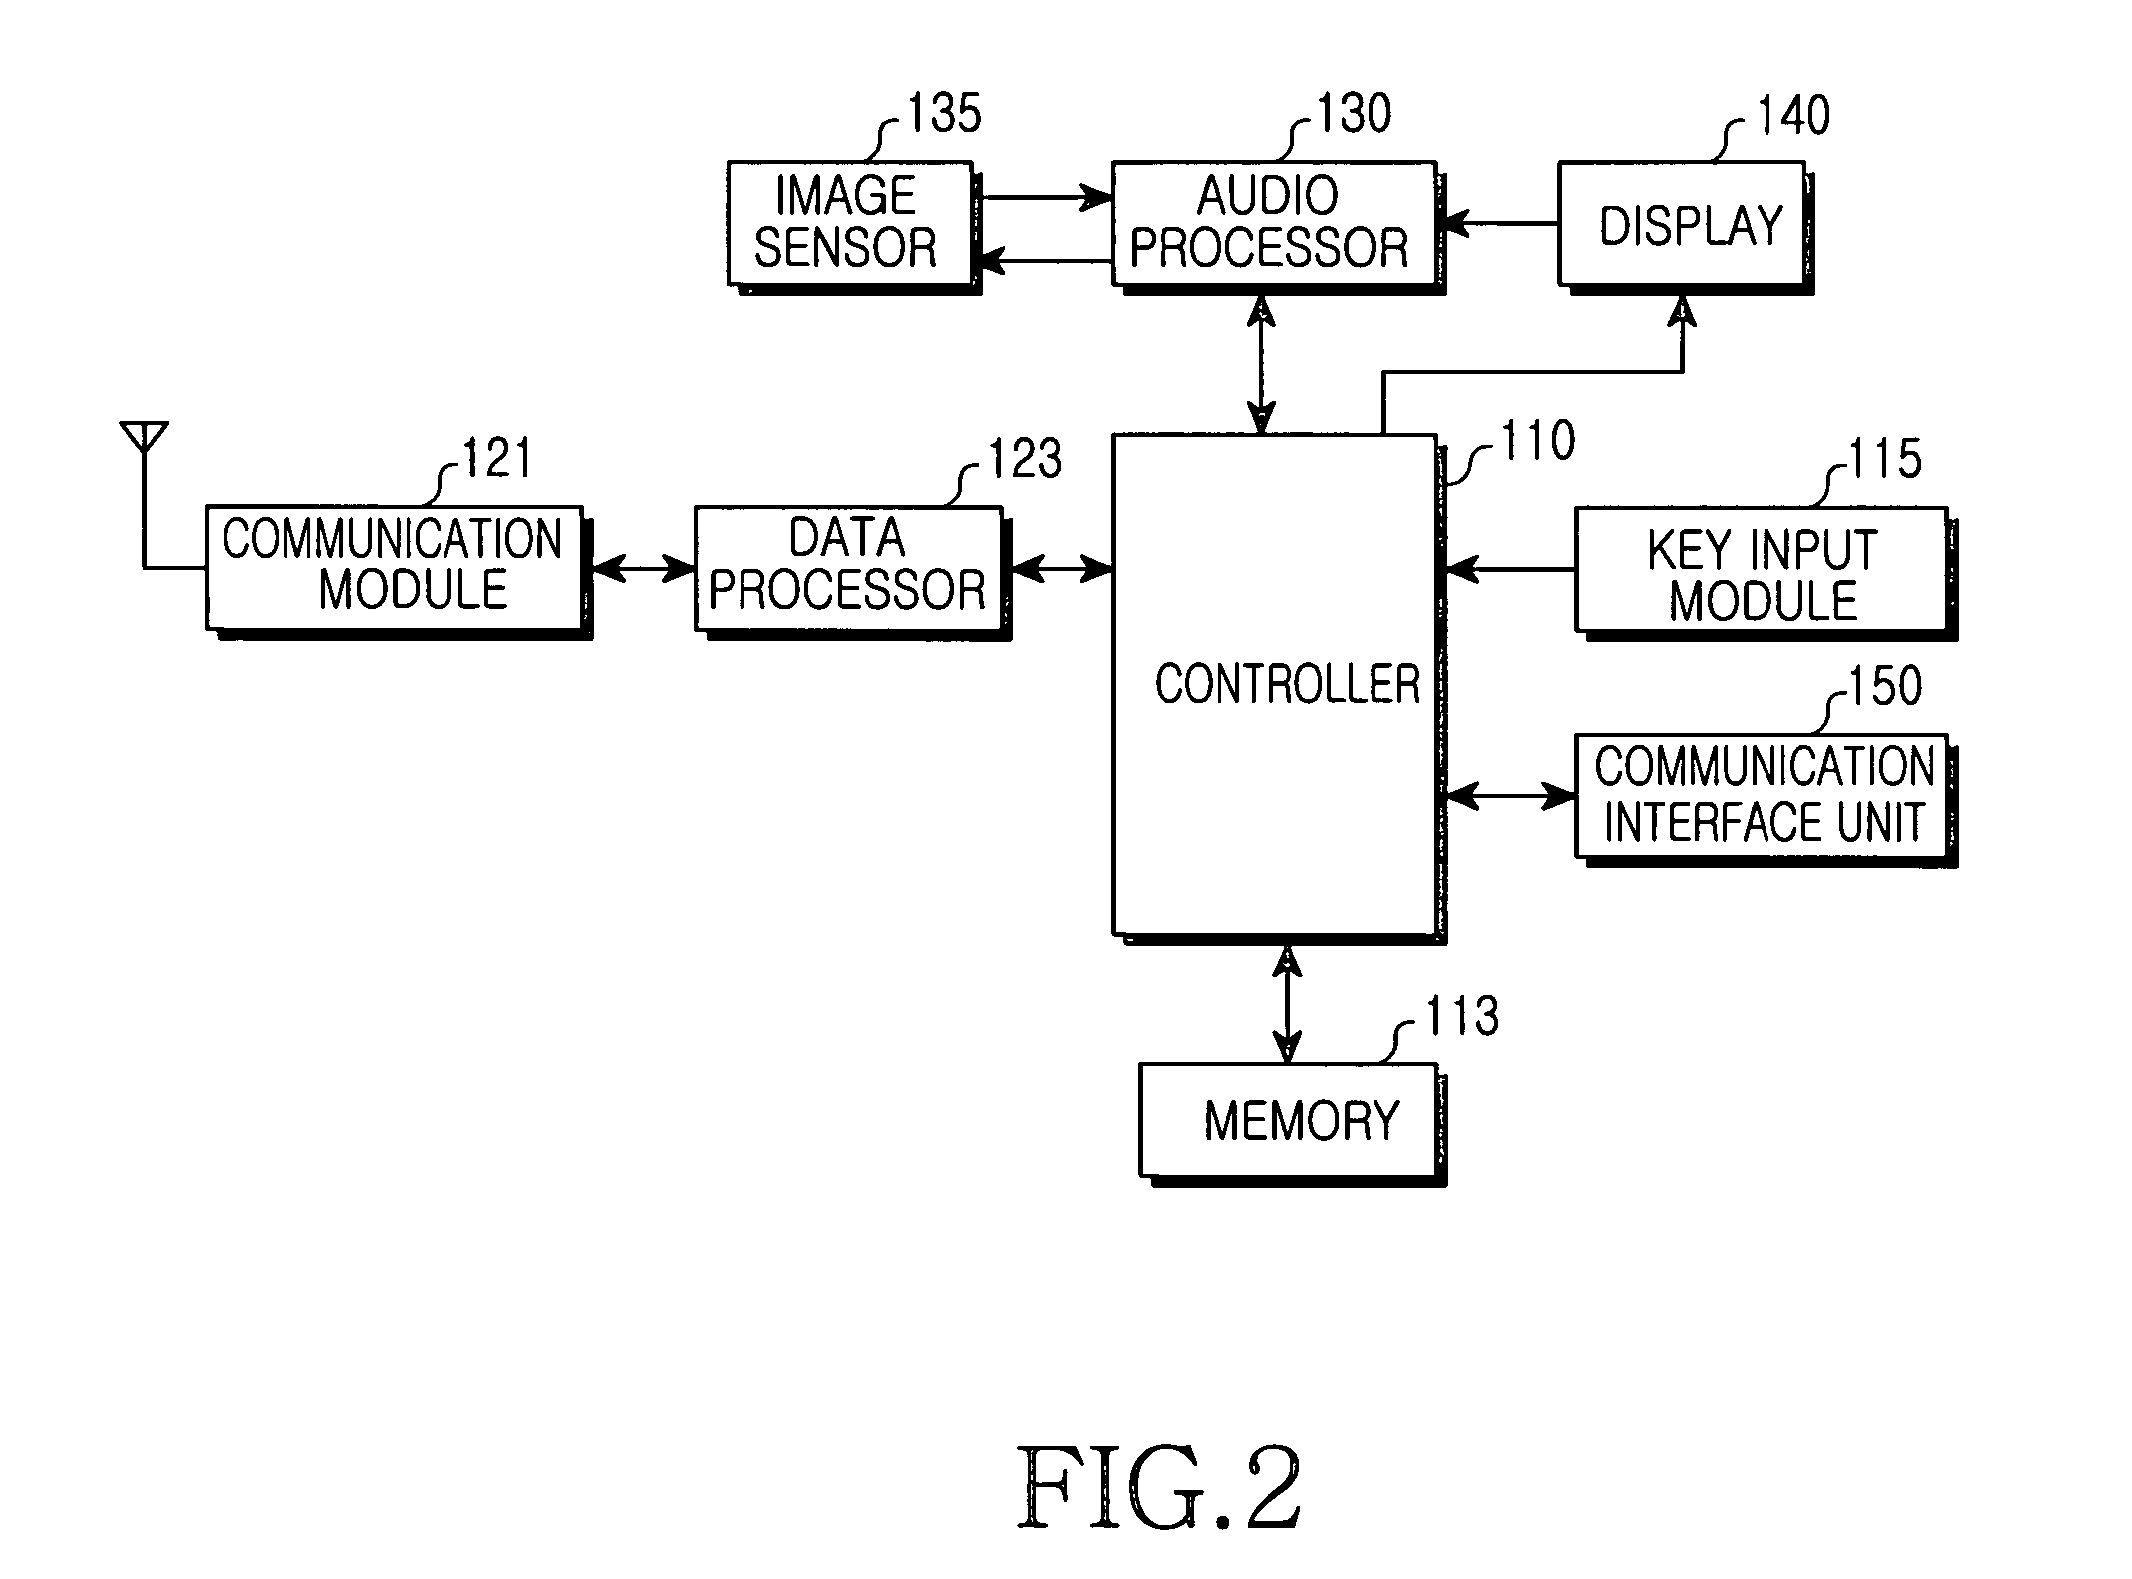 Apparatus and method for processing a data backup service for use in a mobile terminal